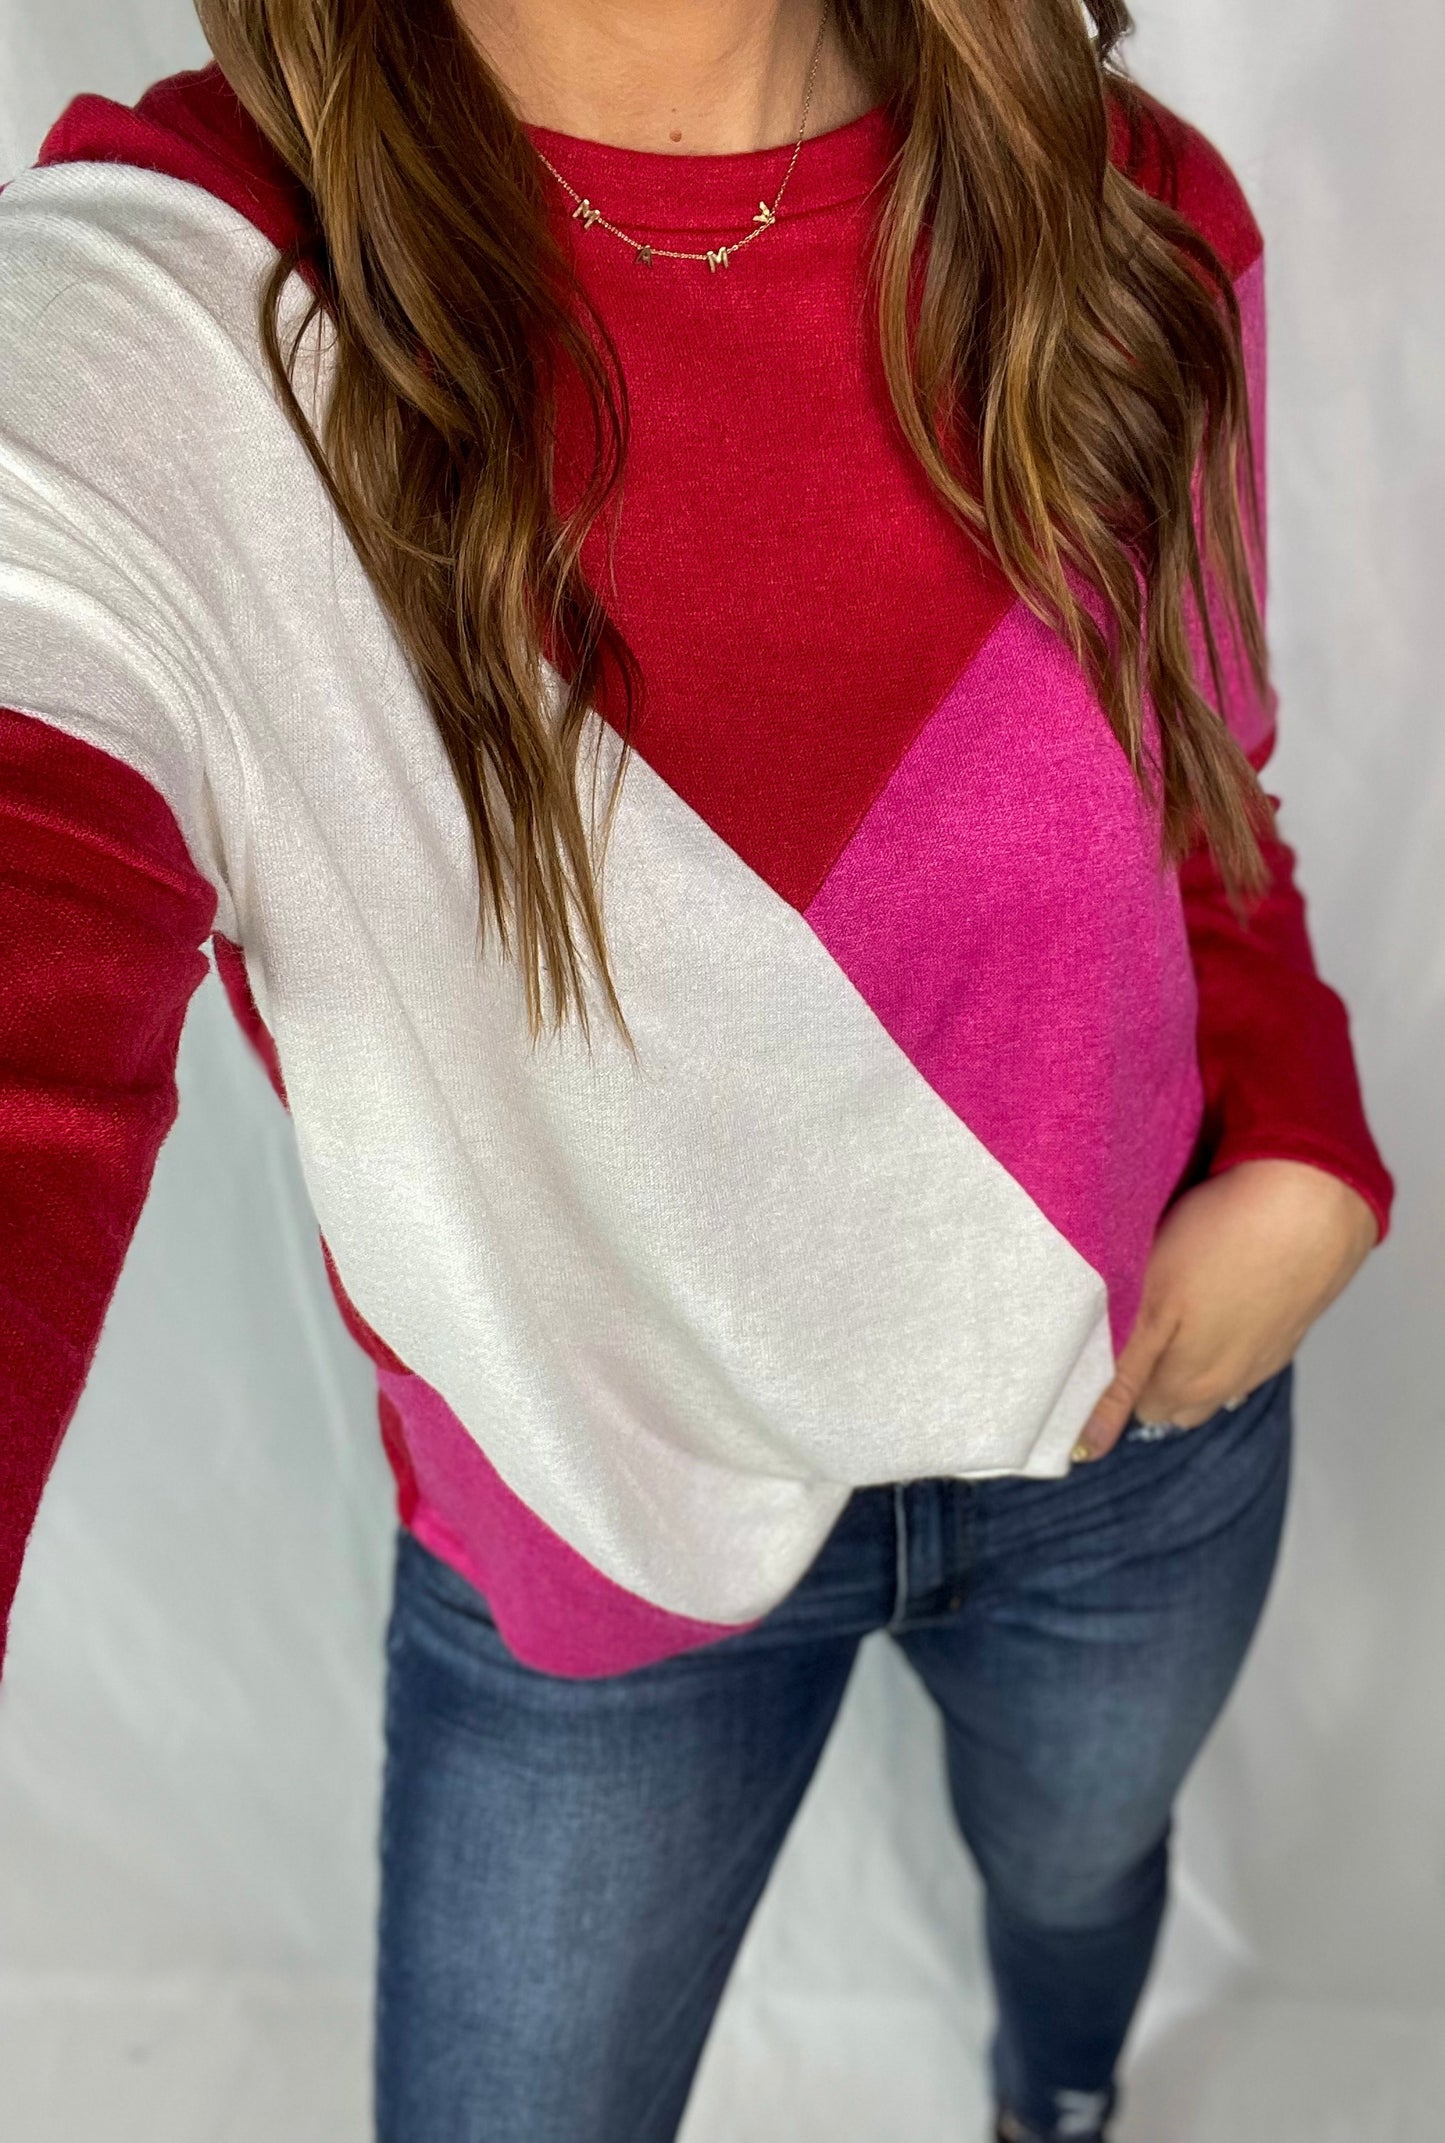 Hello Lover Red/White/Pink Dolman Sleeve Top